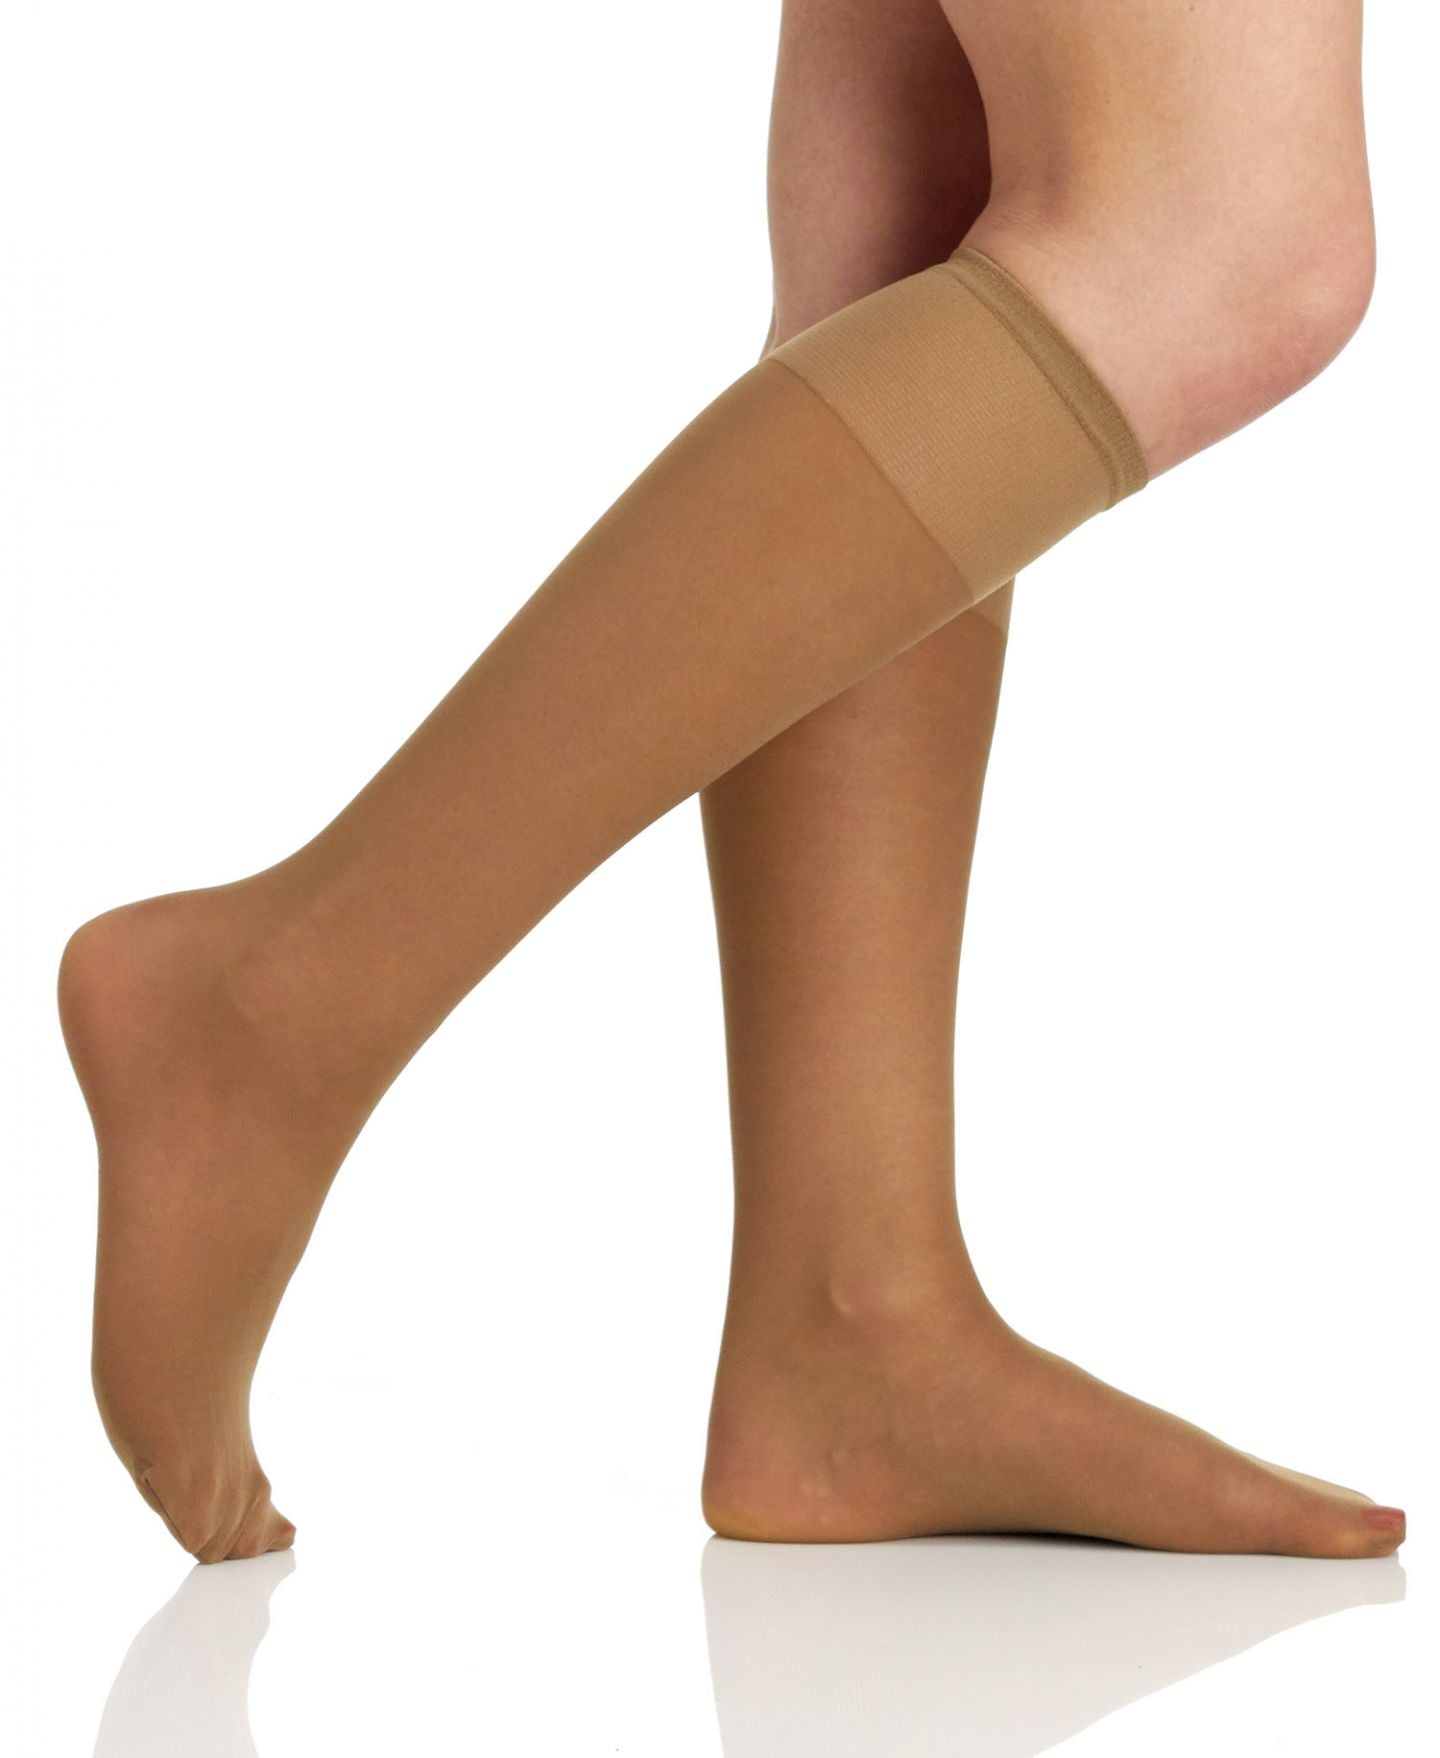 3 Pair Pack Sheer Support Knee High with Sandalfoot Toe